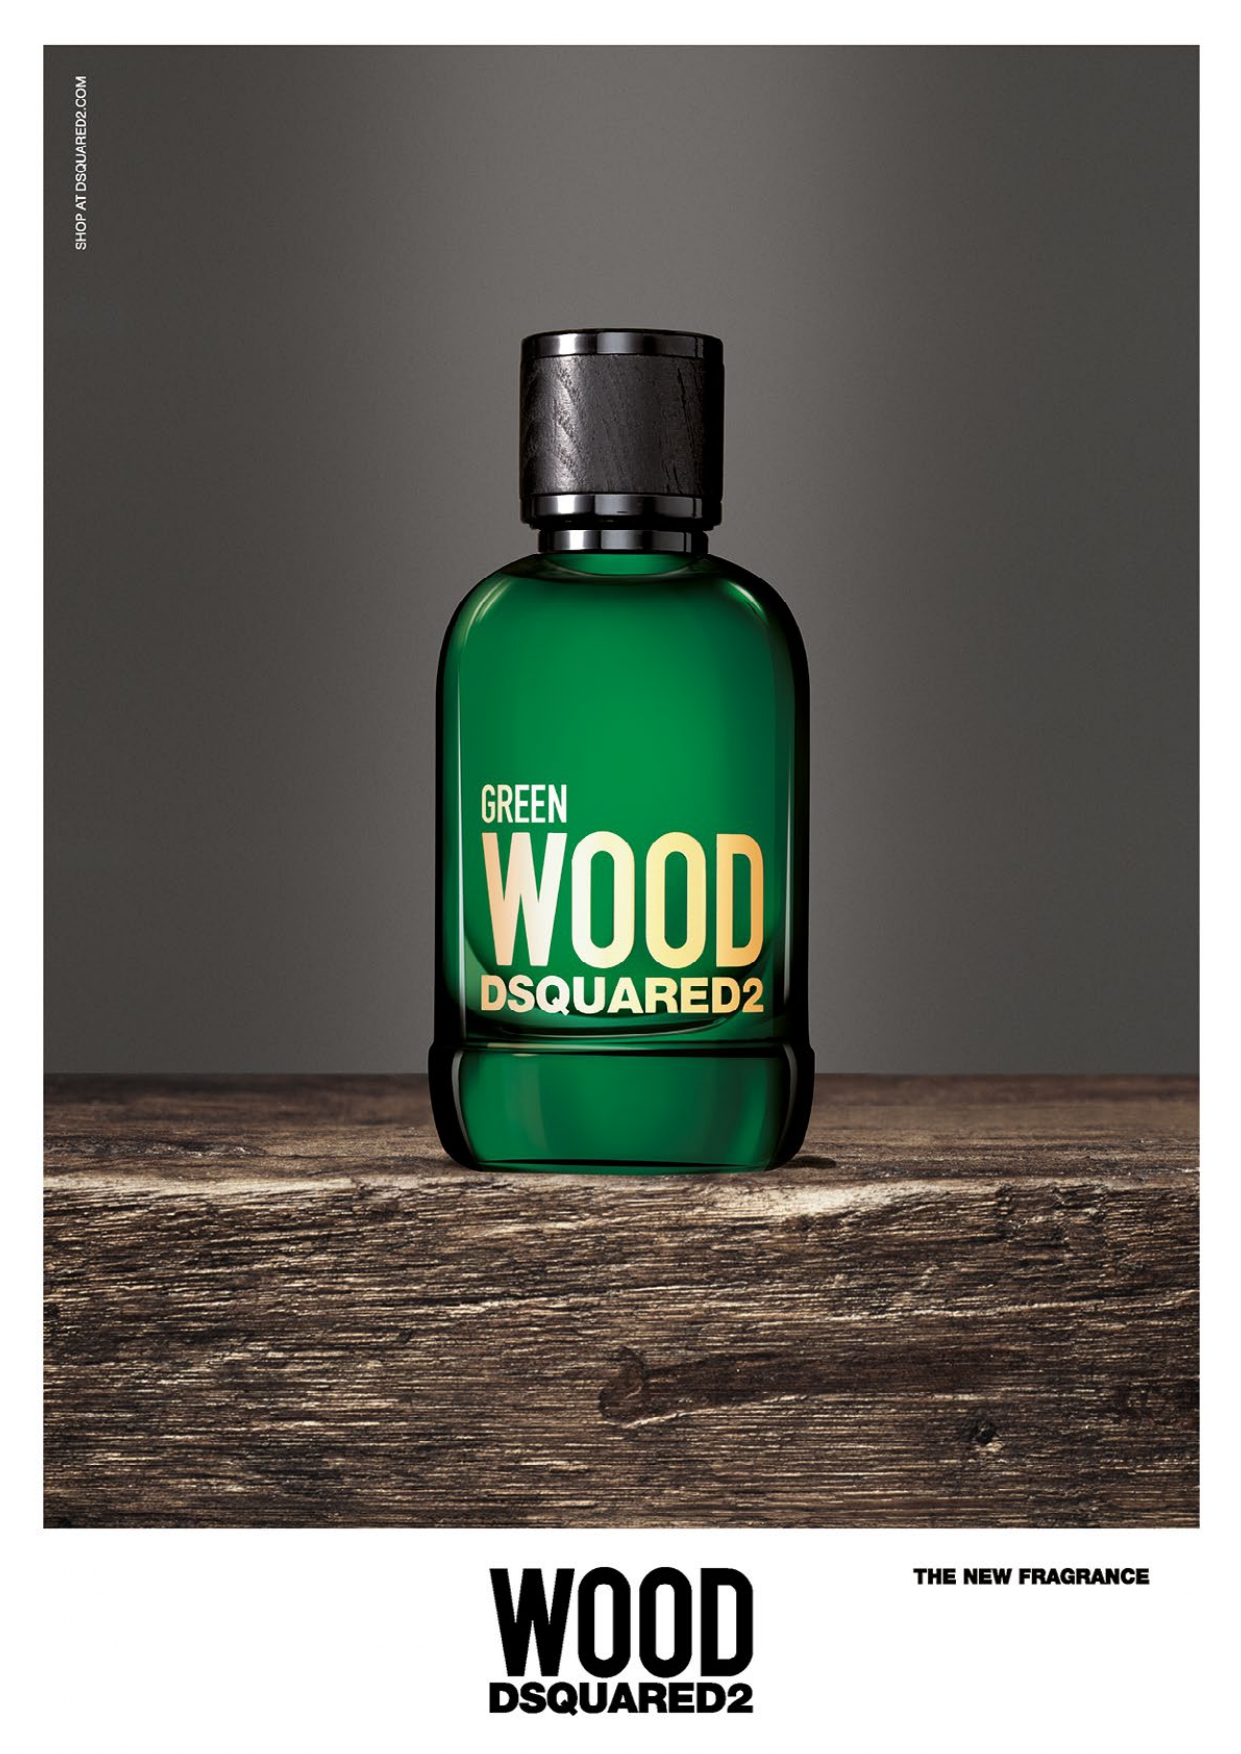 Green Wood DSQUARED² cologne - a new fragrance for men 2019